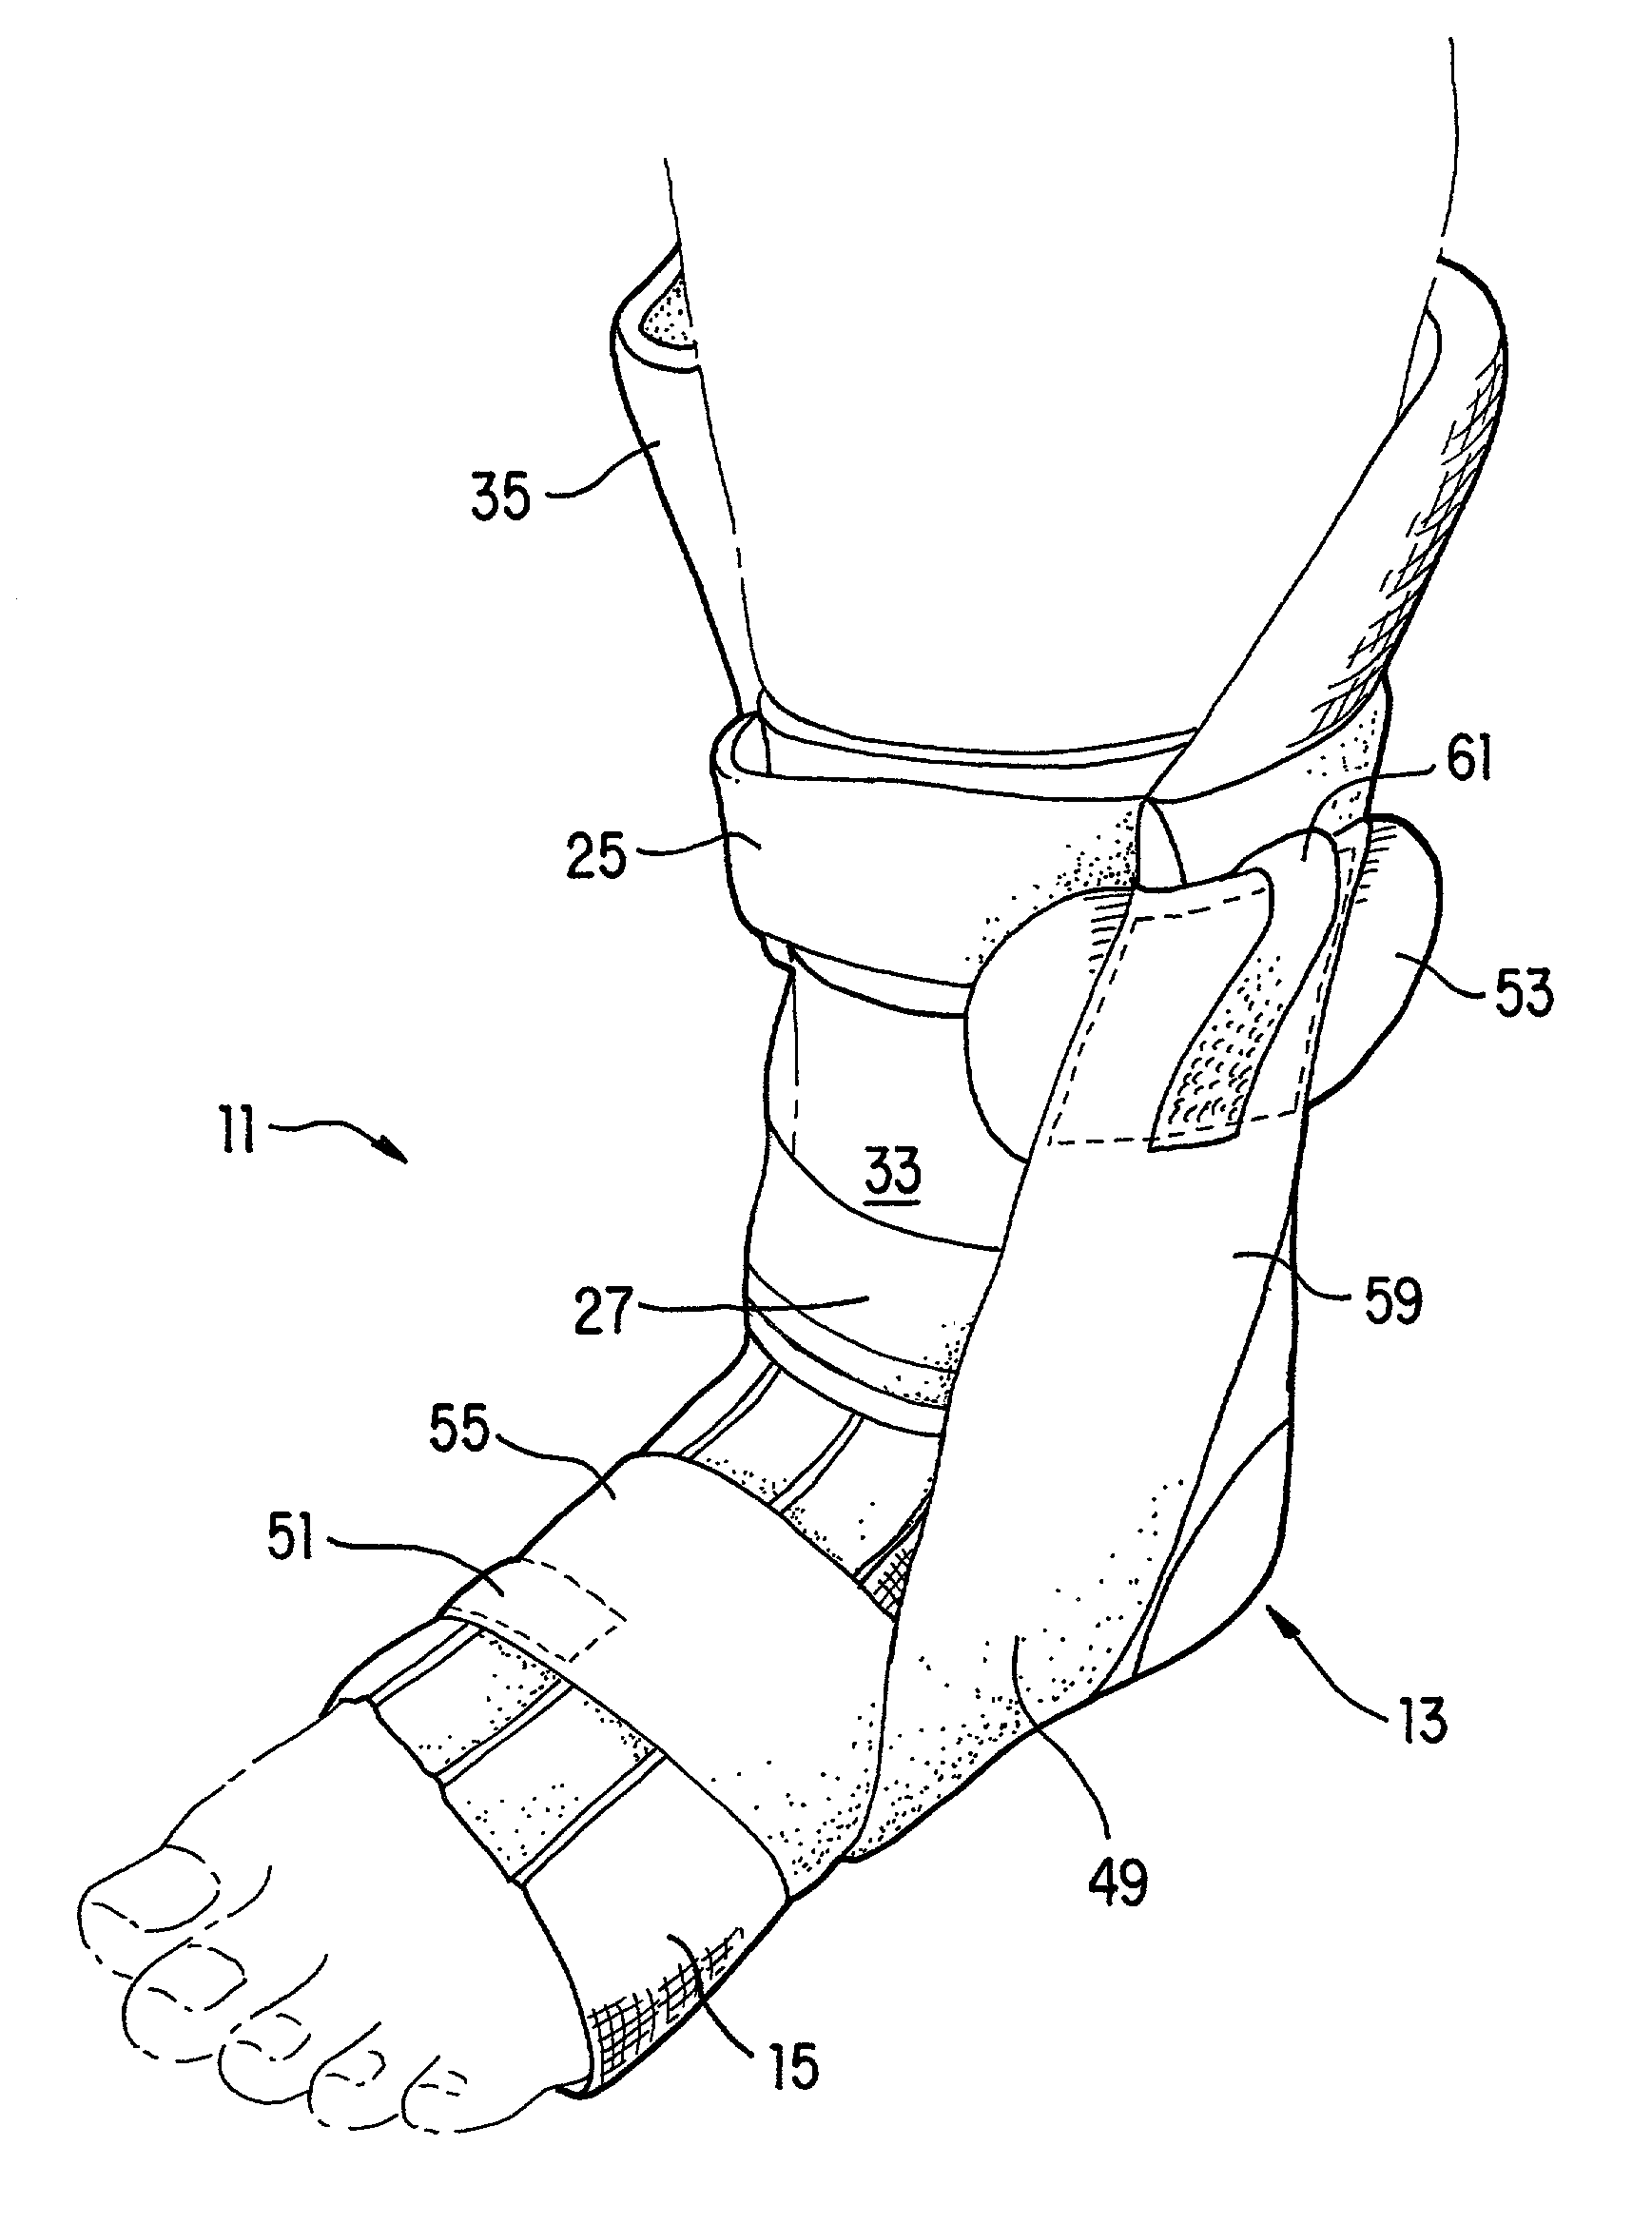 Ankle control system